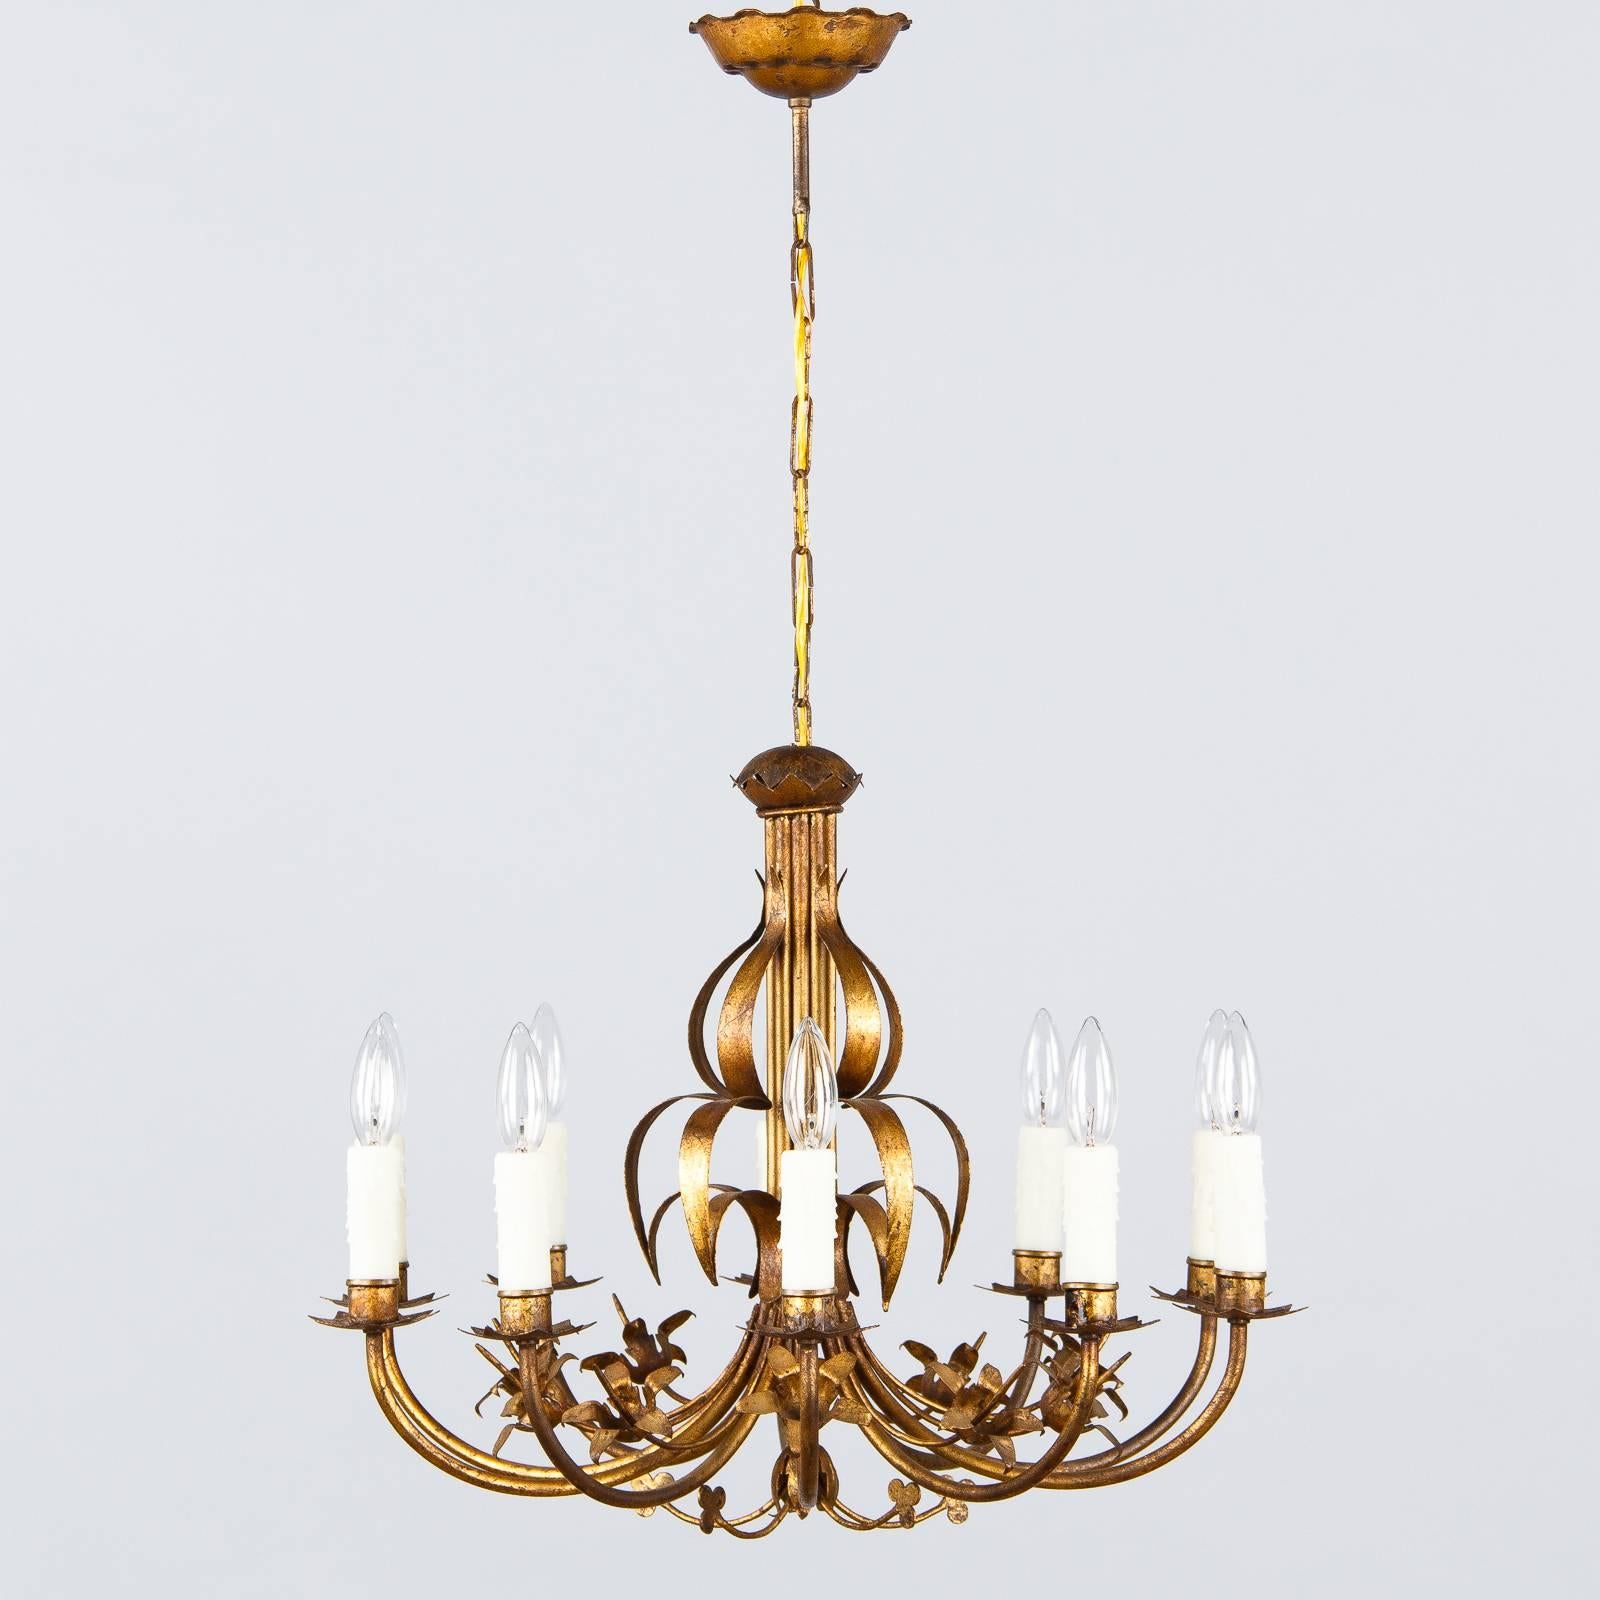 A ten-light French gilded metal chandelier that was found in a private home in the Loire region. The fixture features designs of stars, flowers and clovers. The adjustable chain and canopy add 16.5